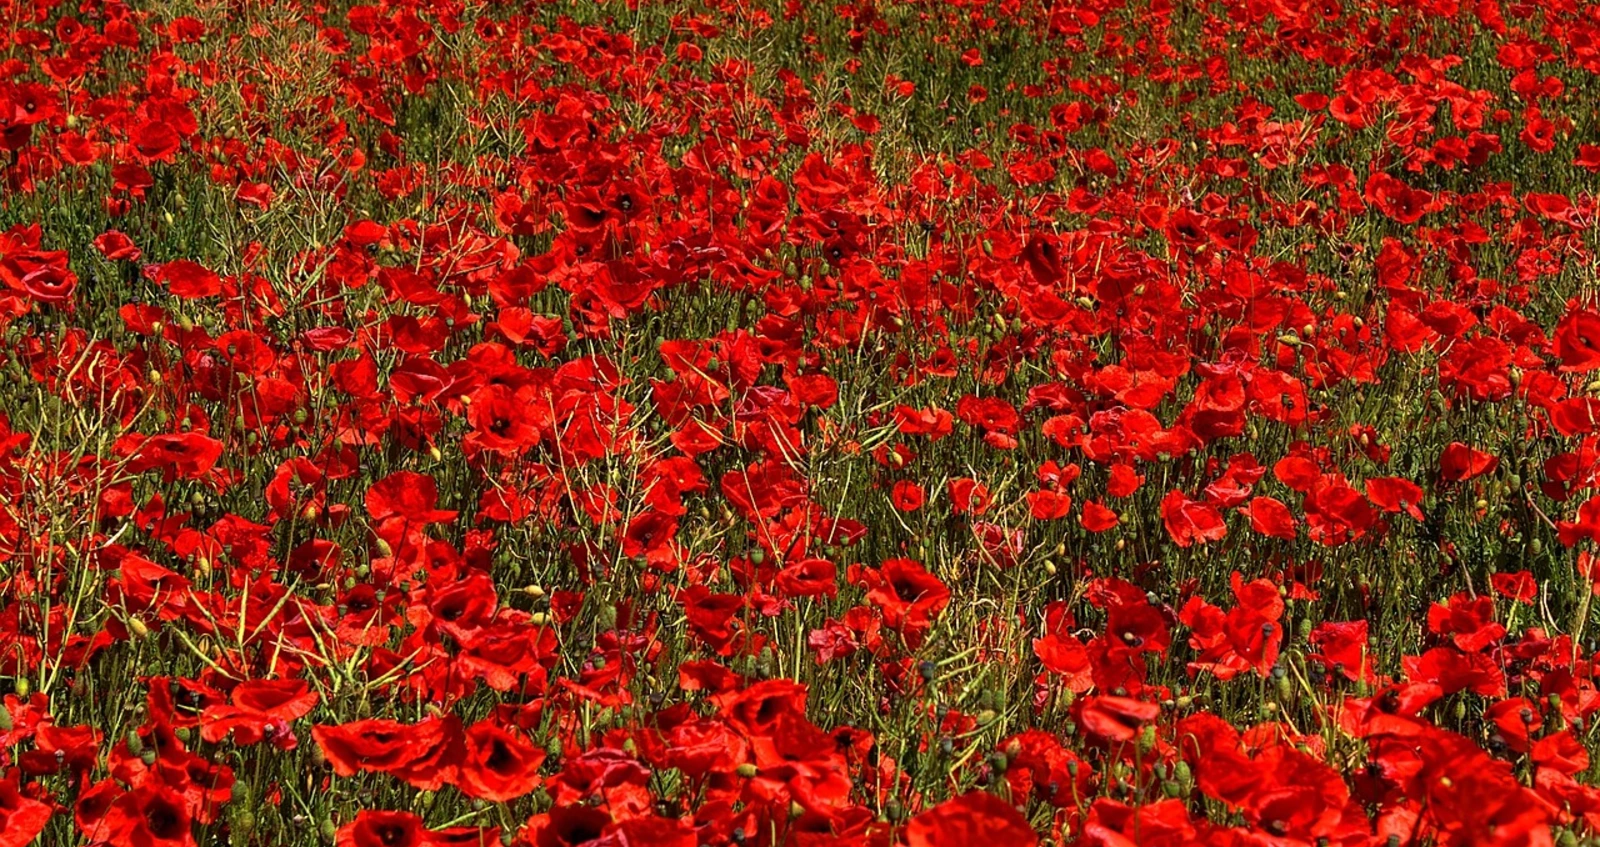 Field full of bright red poppies